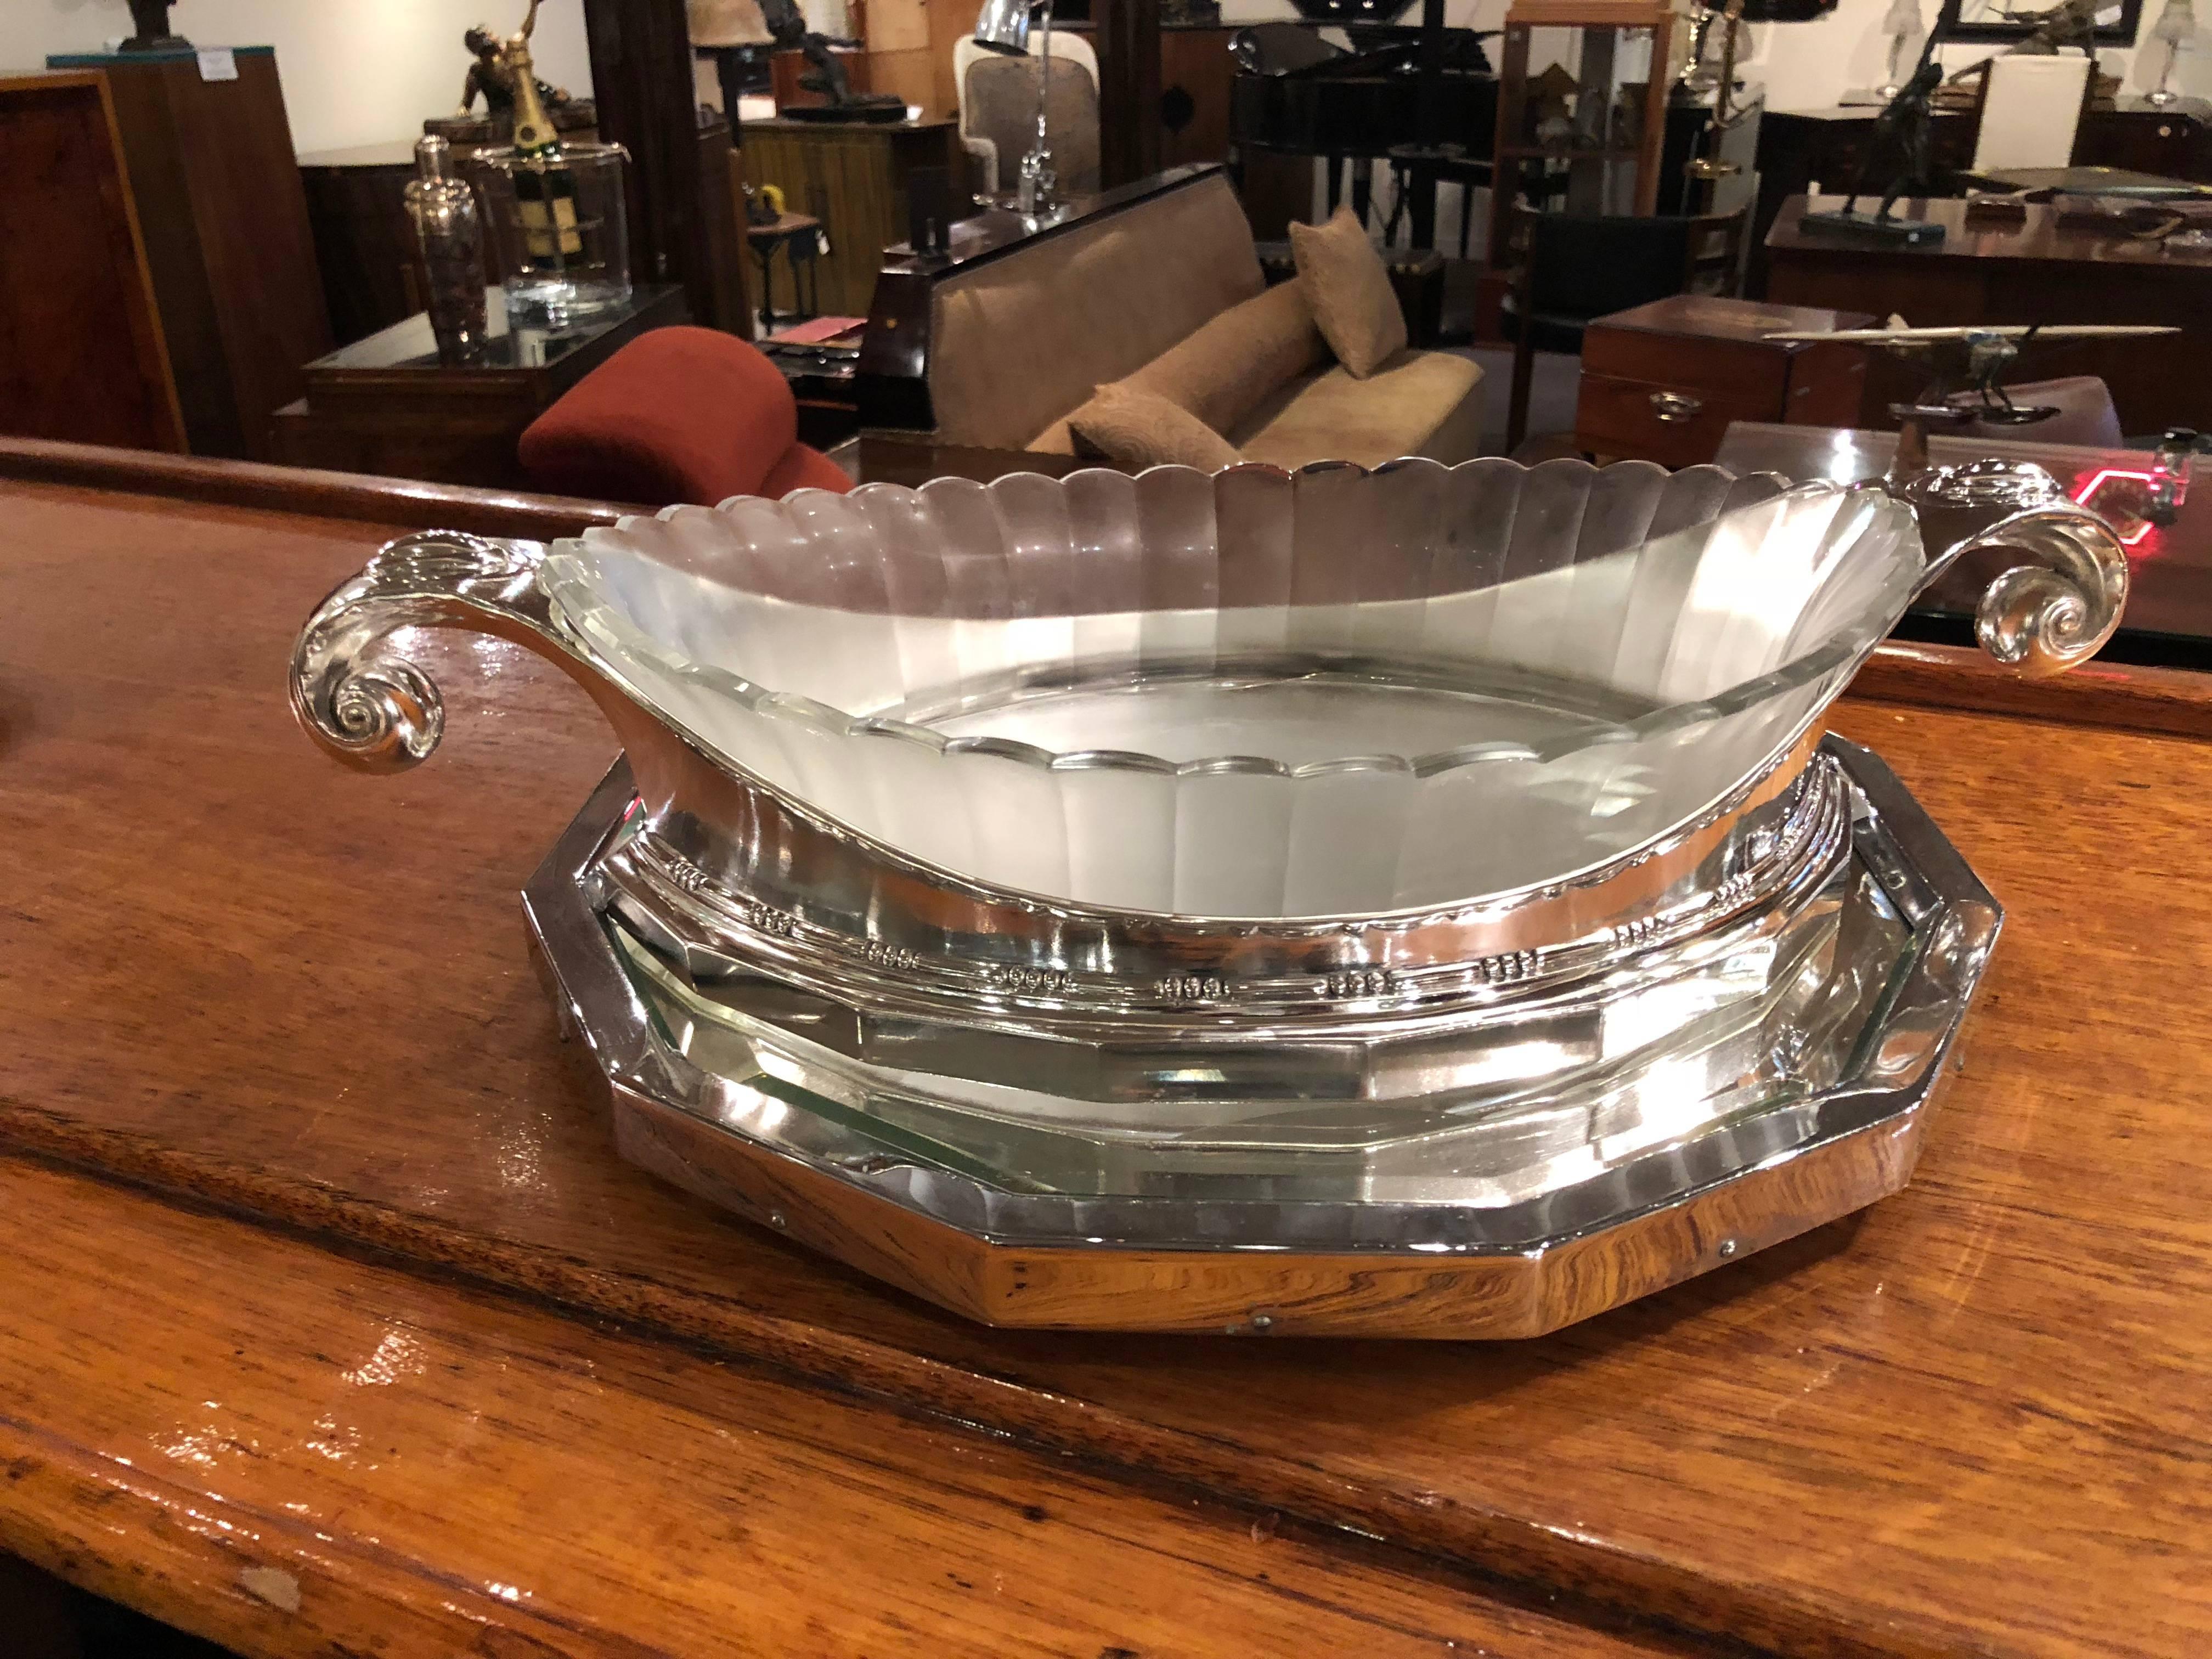 Christofle ‘Gallia’ metal and glass centrepiece designed by Sue et Mare, circa 1930. Faceted thick cut-glass original liner supported within silvered metal mounts with scrolling handles and faceted base. Stamped Gallia Christofle marks, numbered